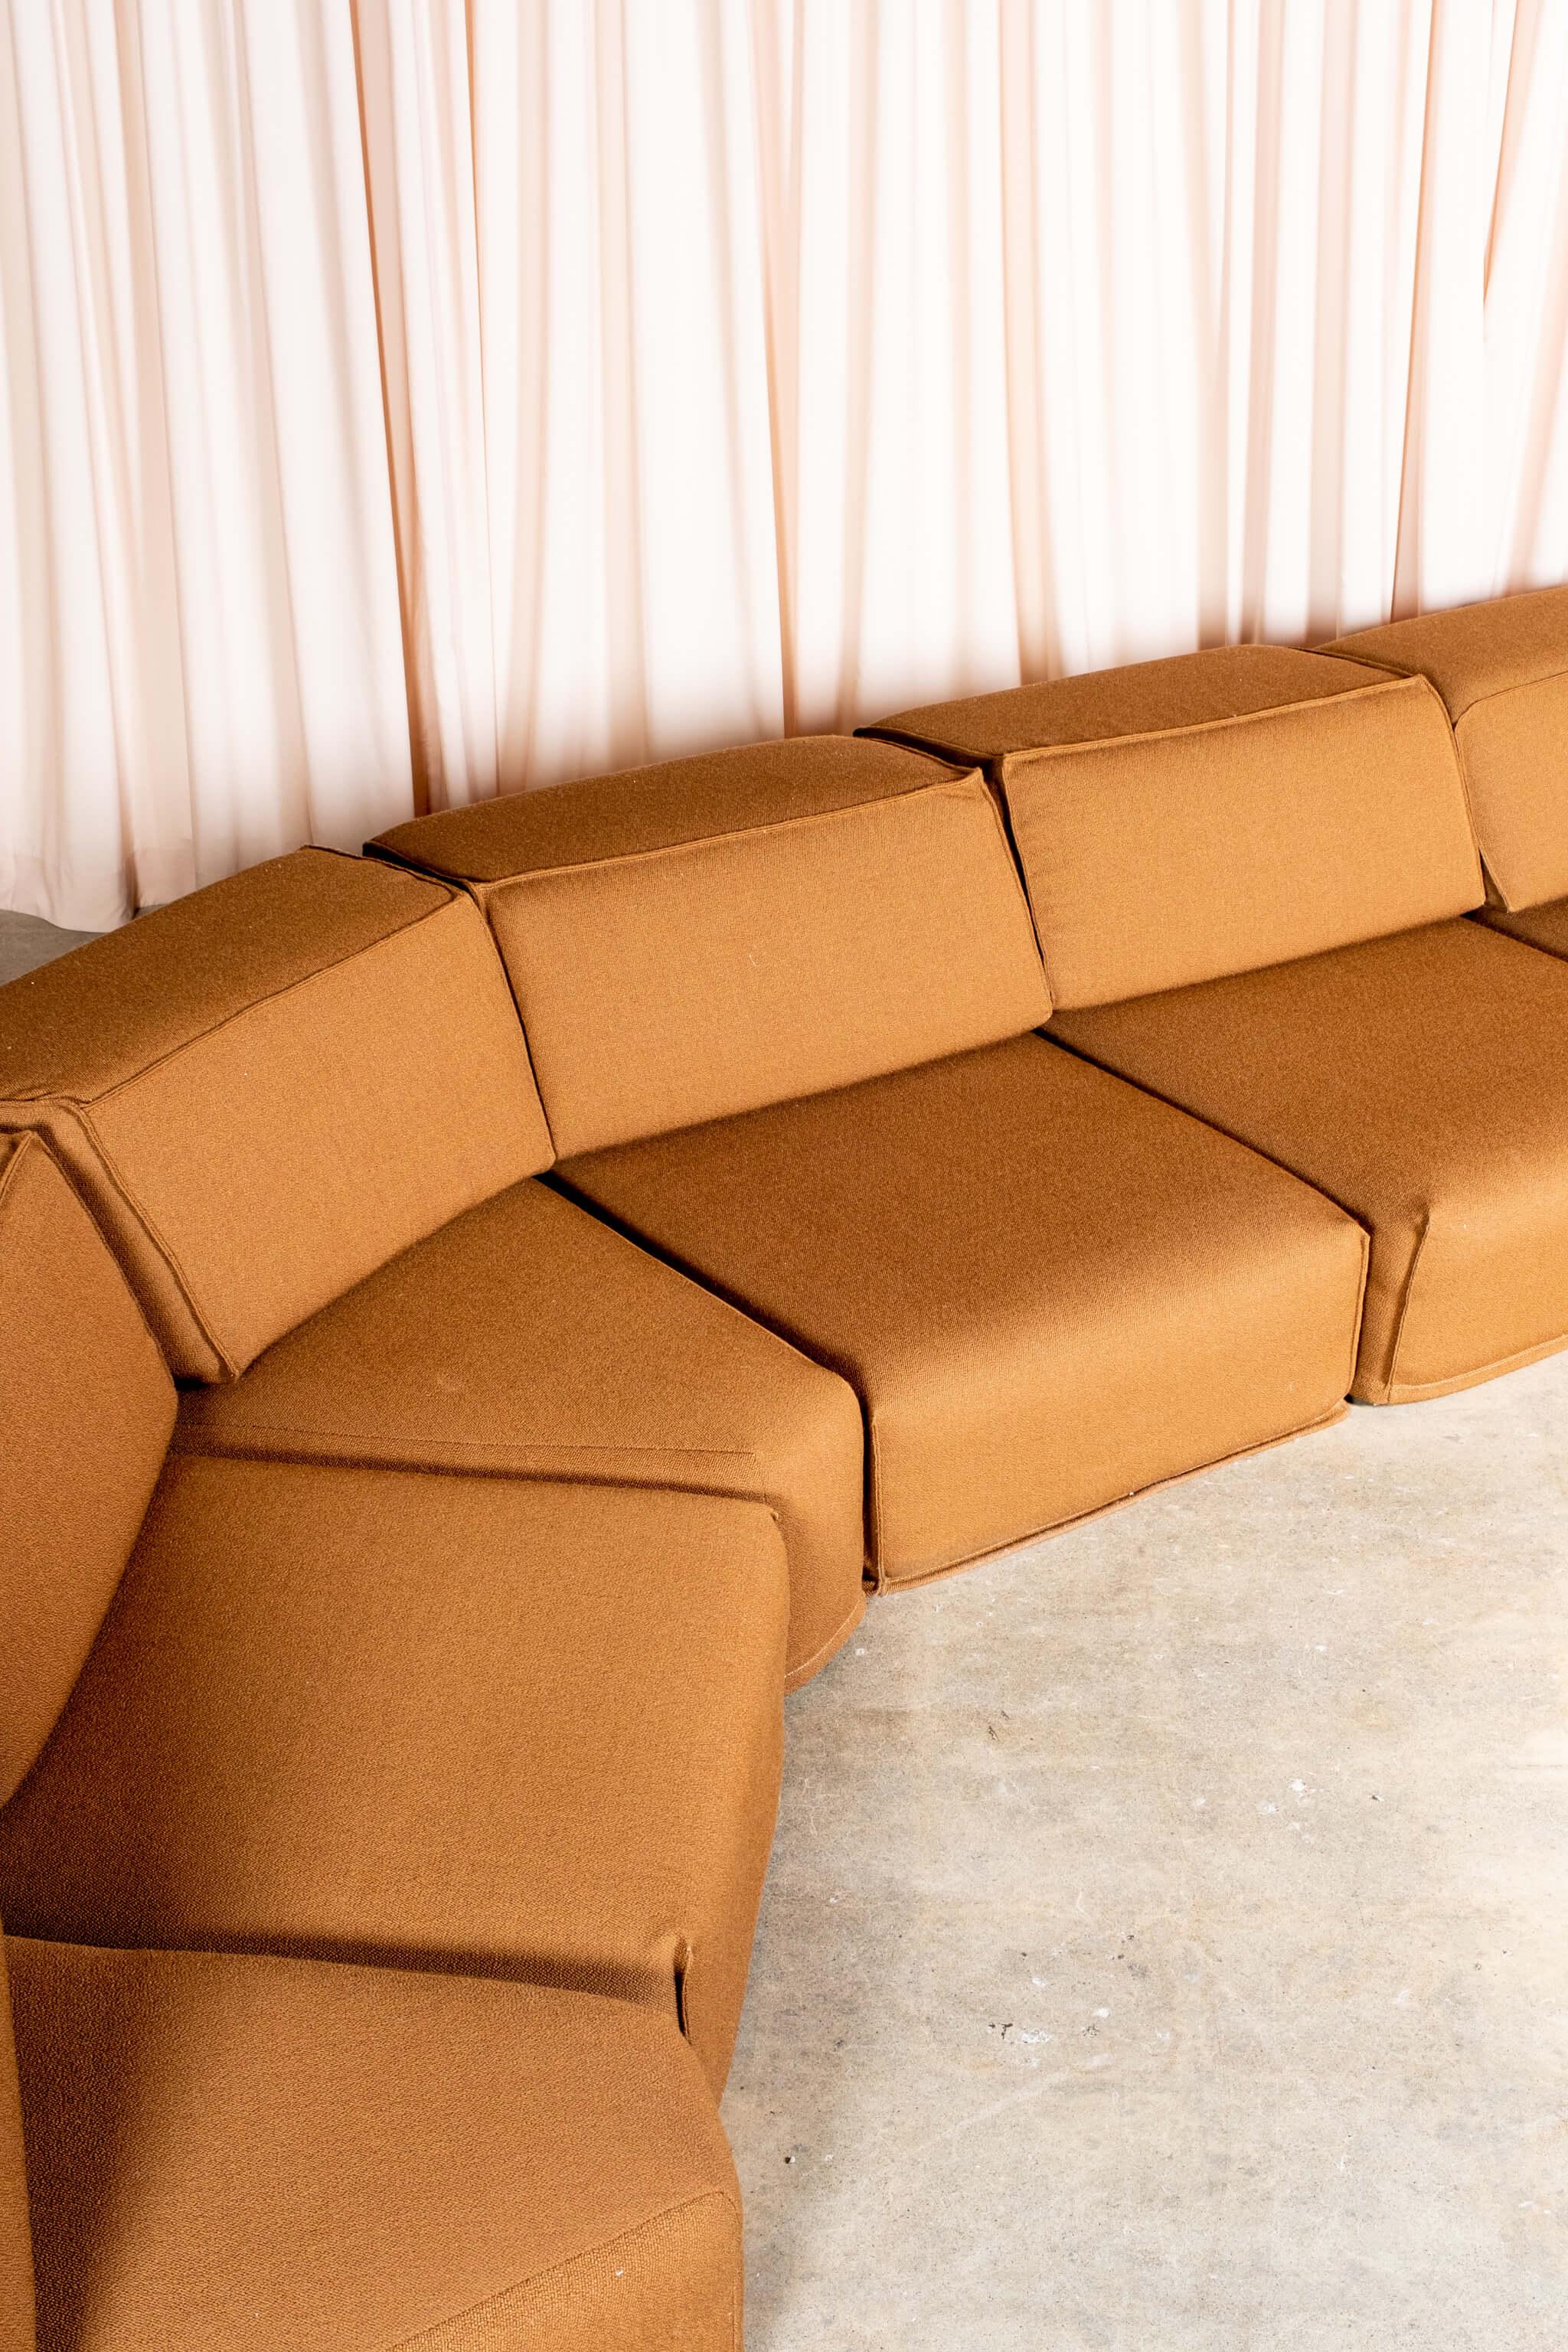 Postmoderne 1970 COR 'Trio' 8 Pieces Modular Sofa by Team Form AG, Newly Reupholstered en vente